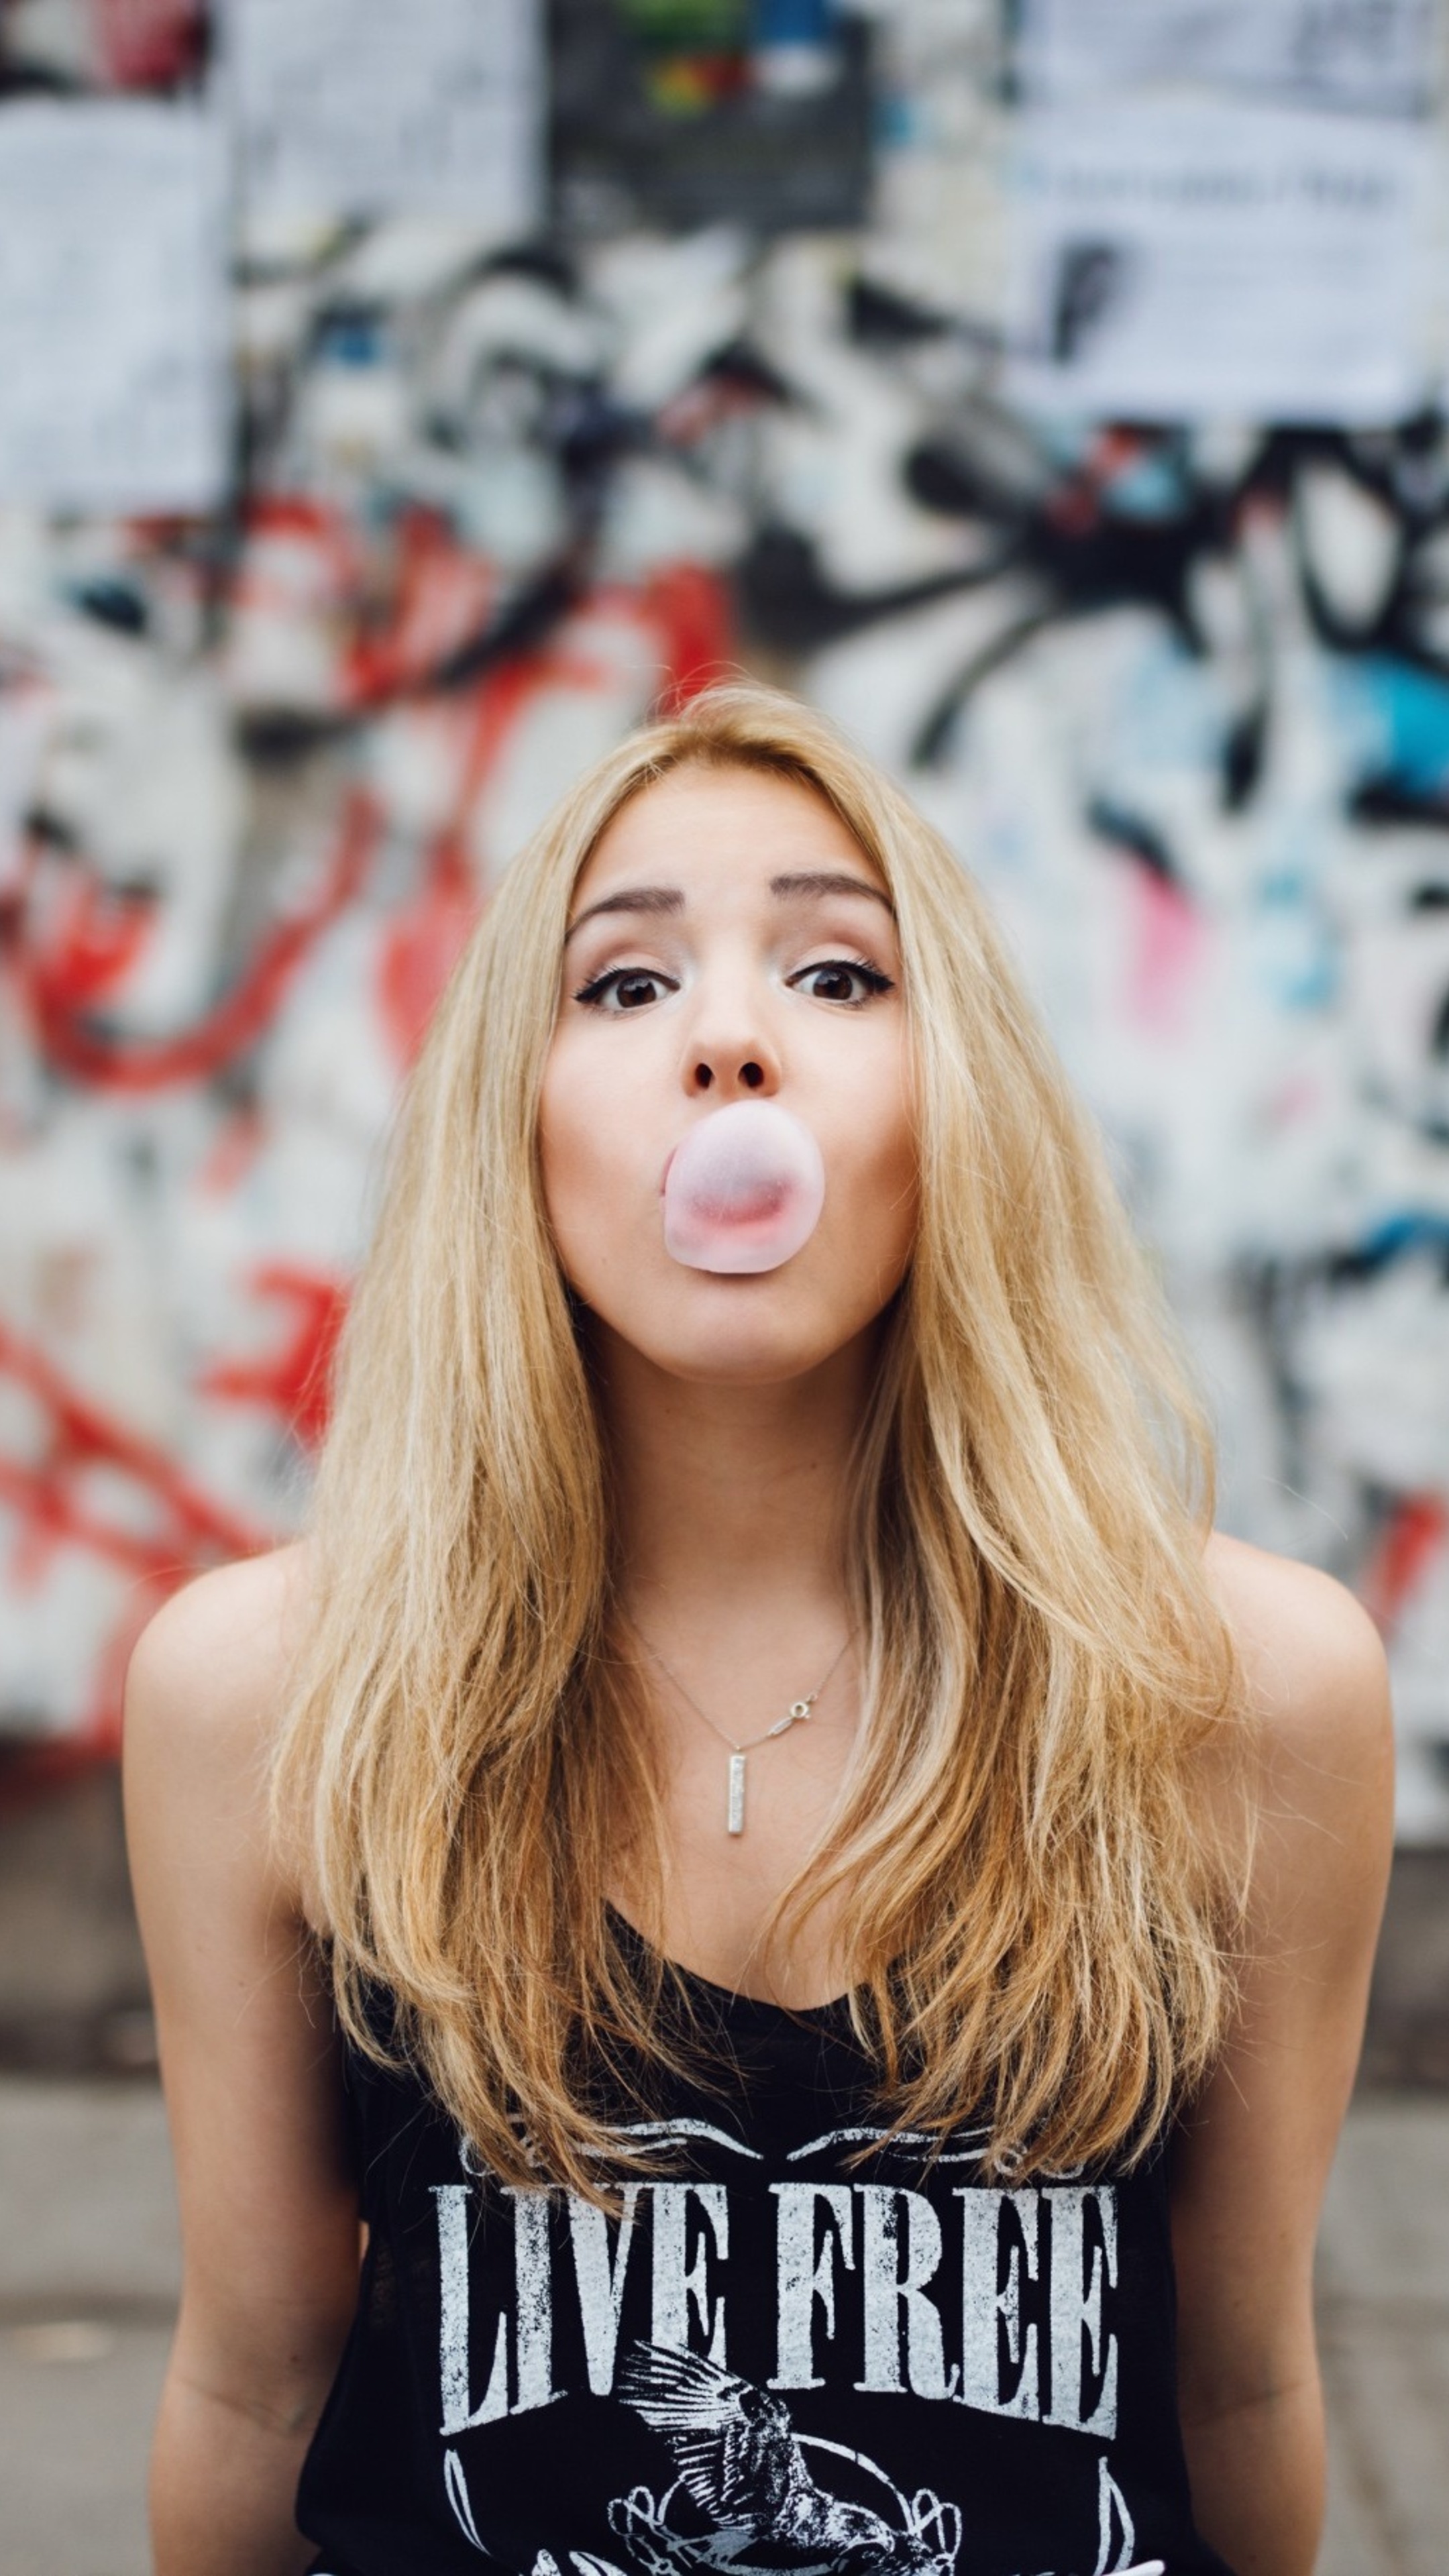 Girl blowing bubble gum, Playful and carefree, Bubble-blowing joy, Photo-worthy moment, 2160x3840 4K Handy